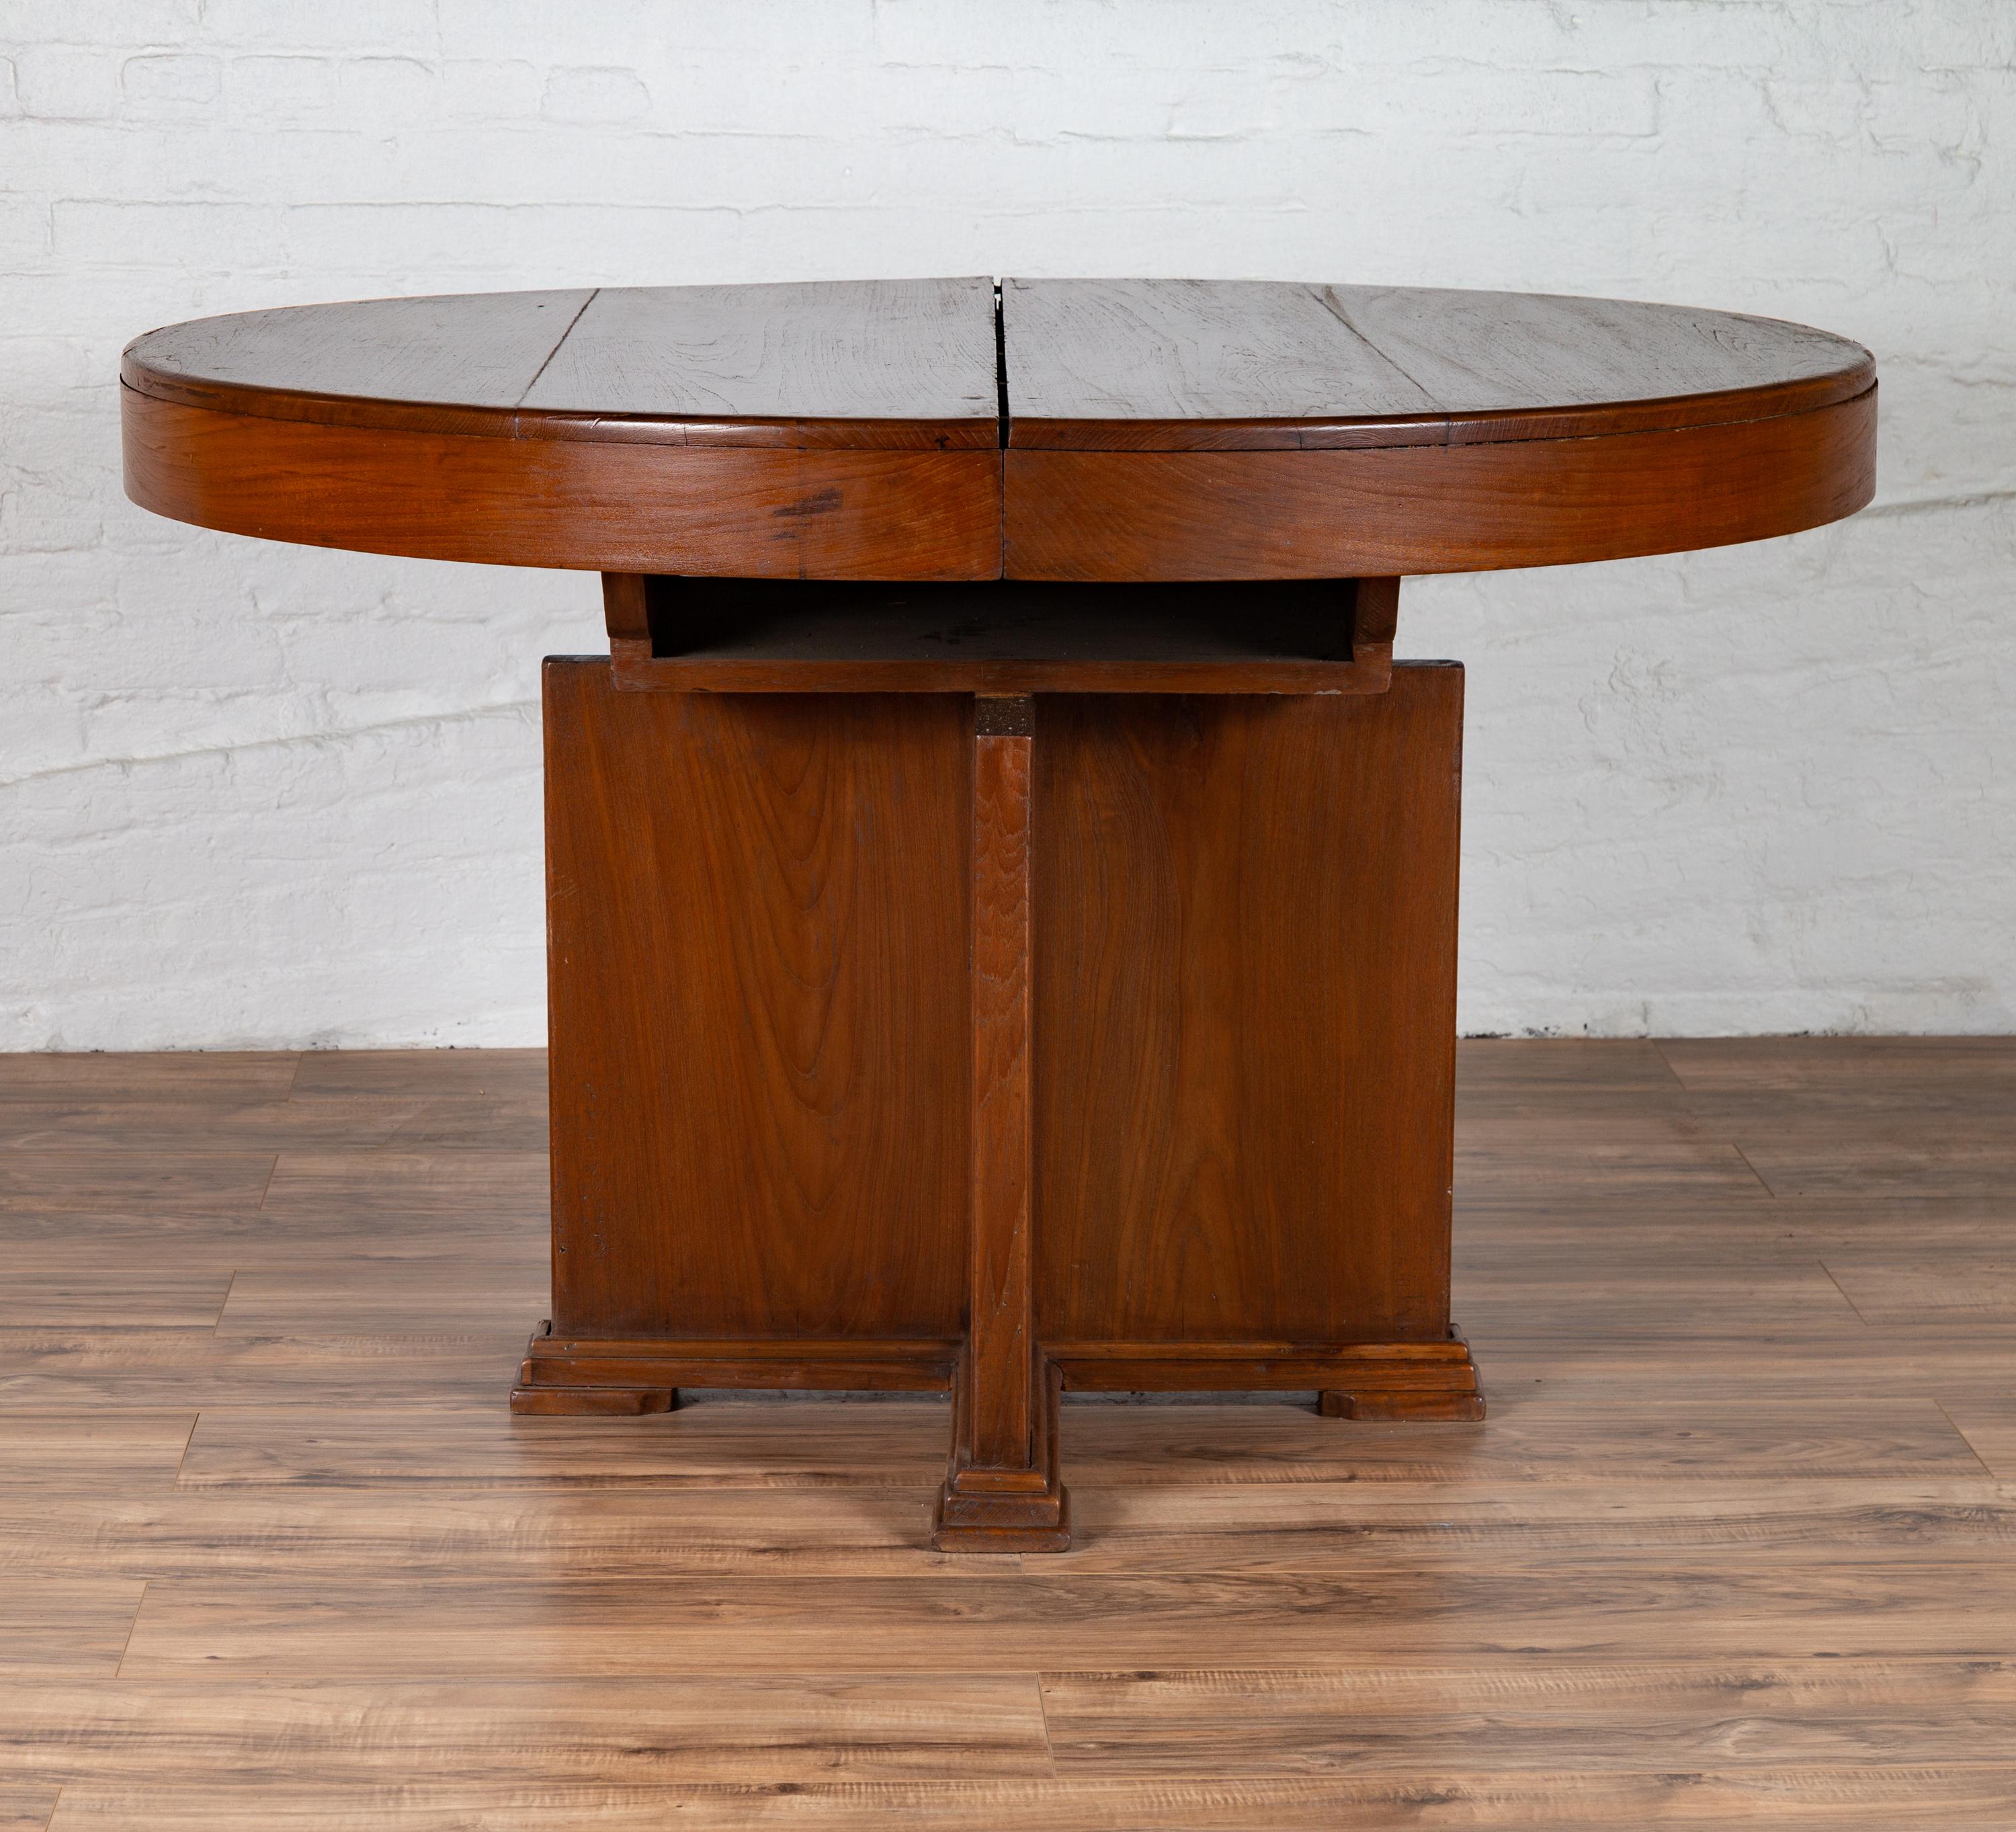 An antique Indonesian wooden dining table from the early 20th century, with central folding leaf and geometric base. Born in Indonesia during the early years of the 20th century, this stylish dining table features a circular planked top concealing a